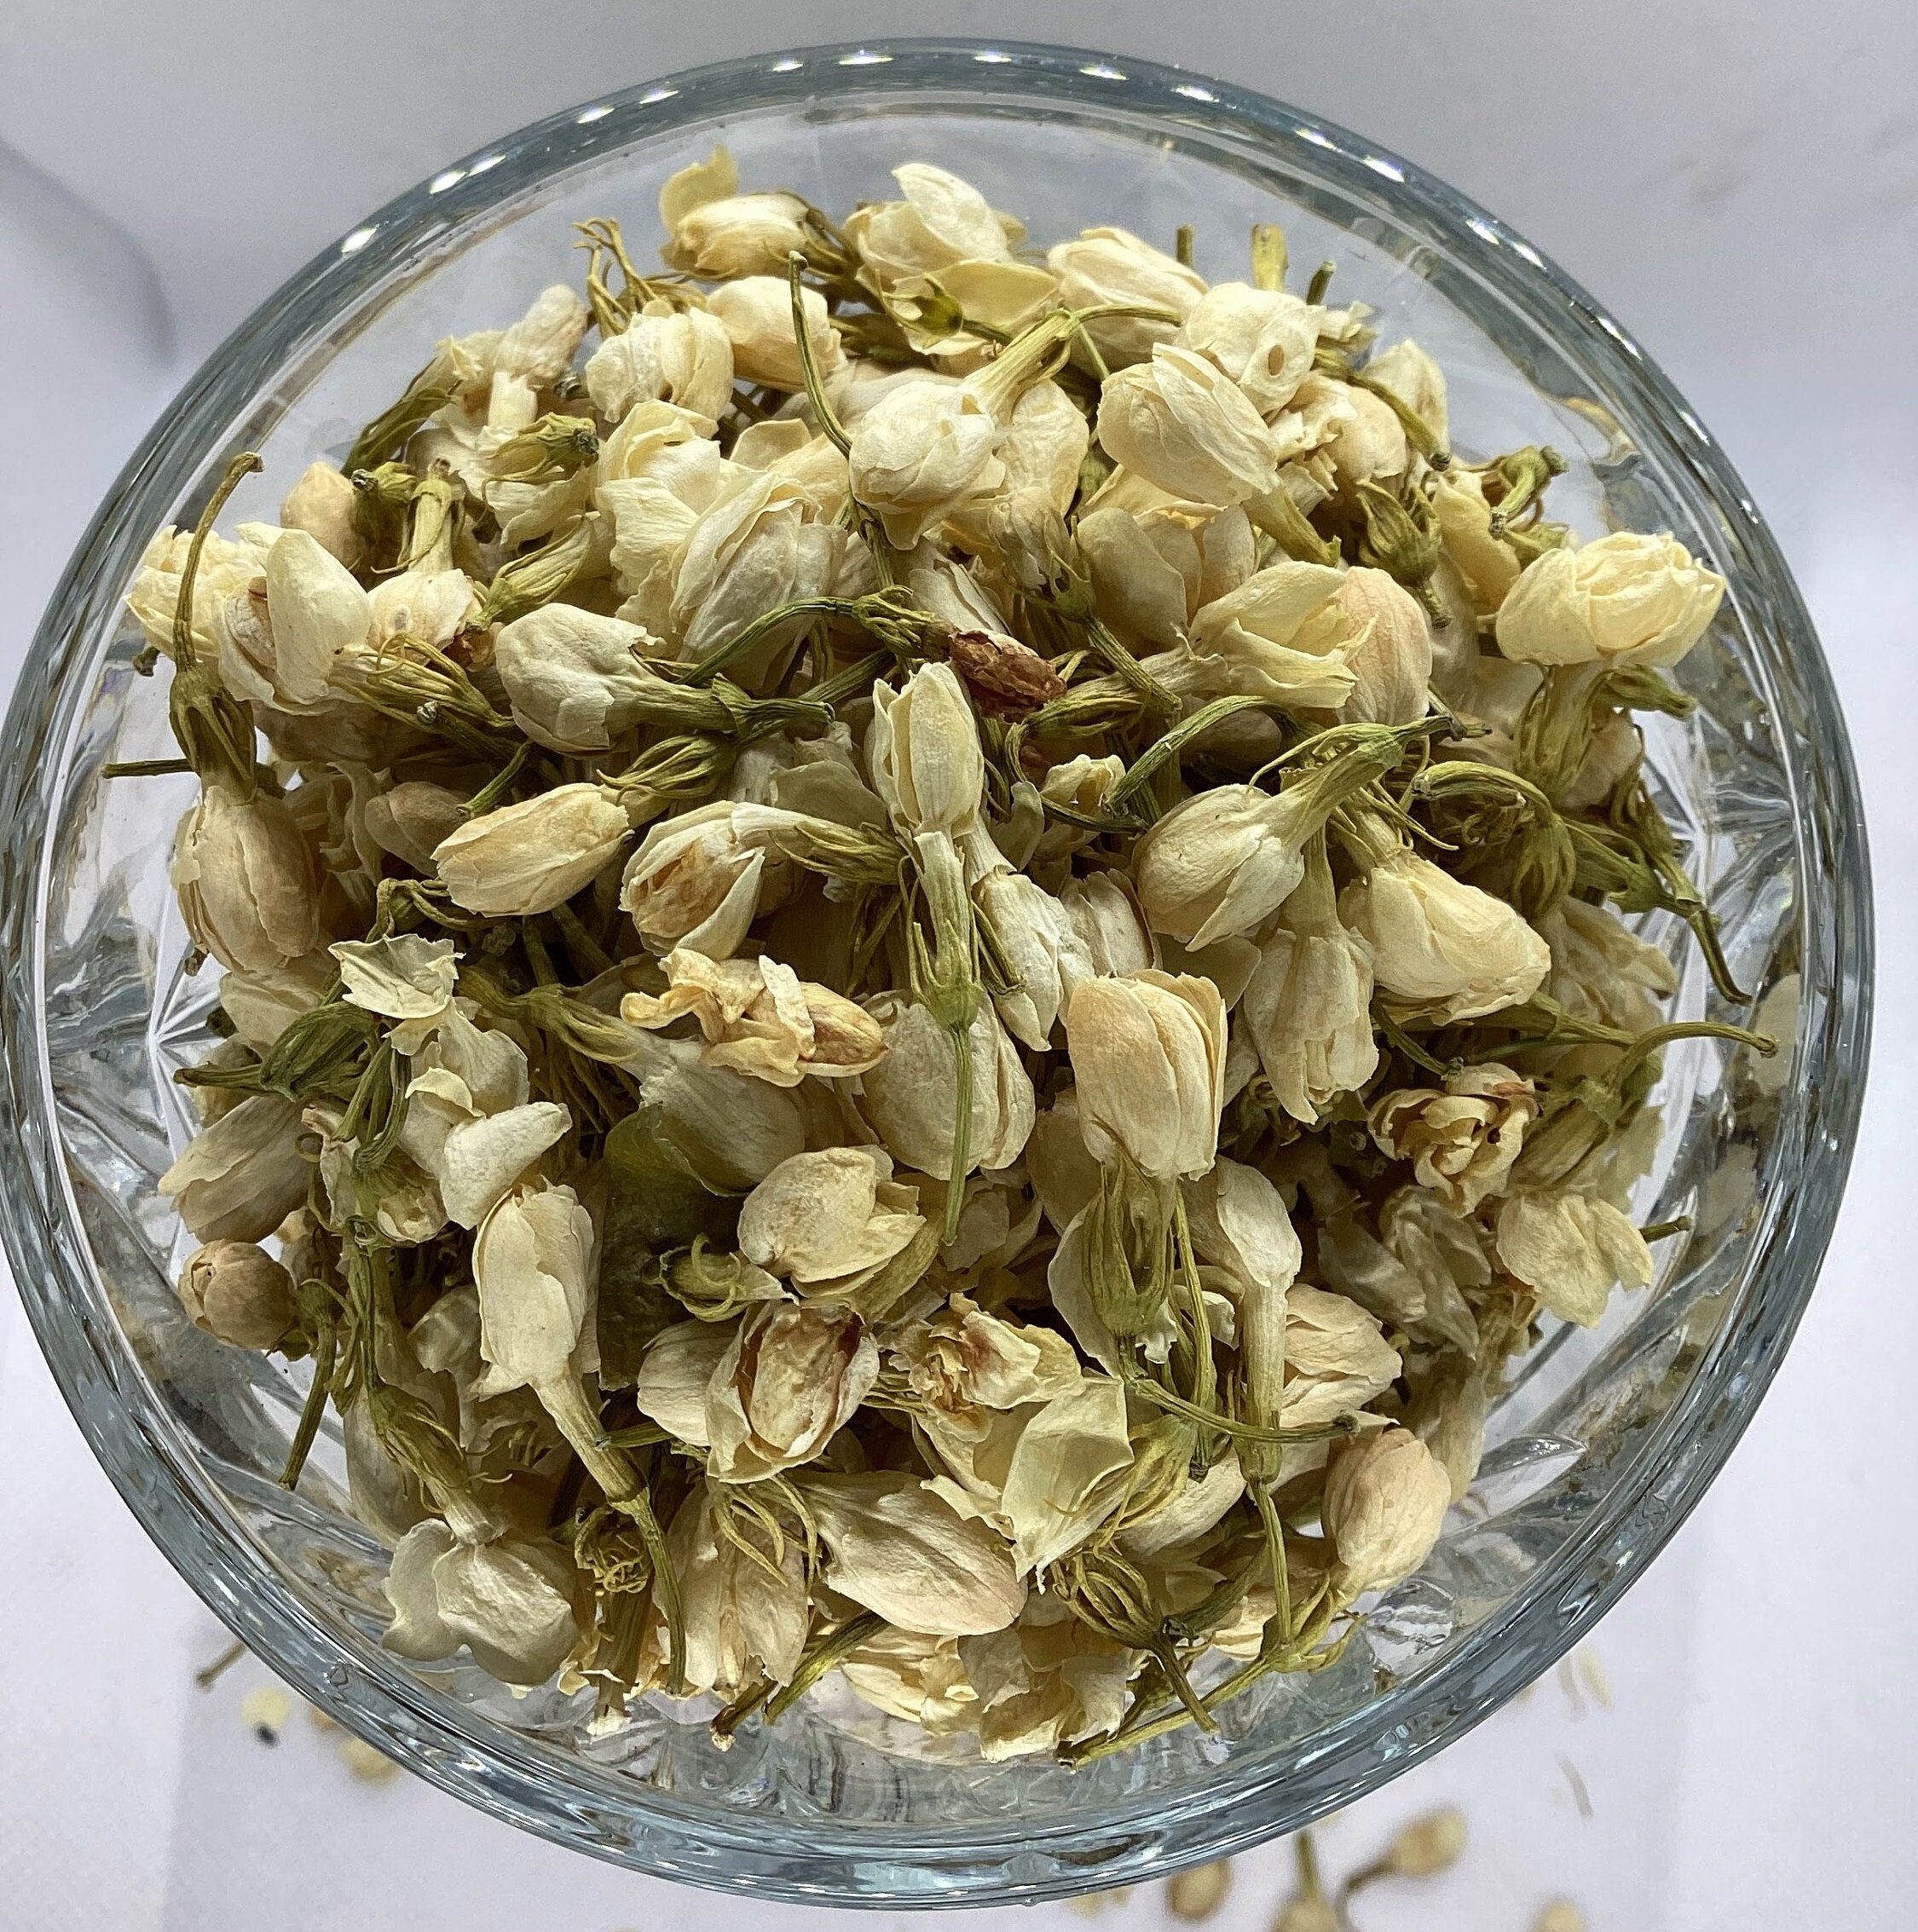 CoolCrafts Dried Jasmine Flowers Culinary Jasmine Buds Dried Flowers for  Tea, Baking, Crafting - 2 OZ